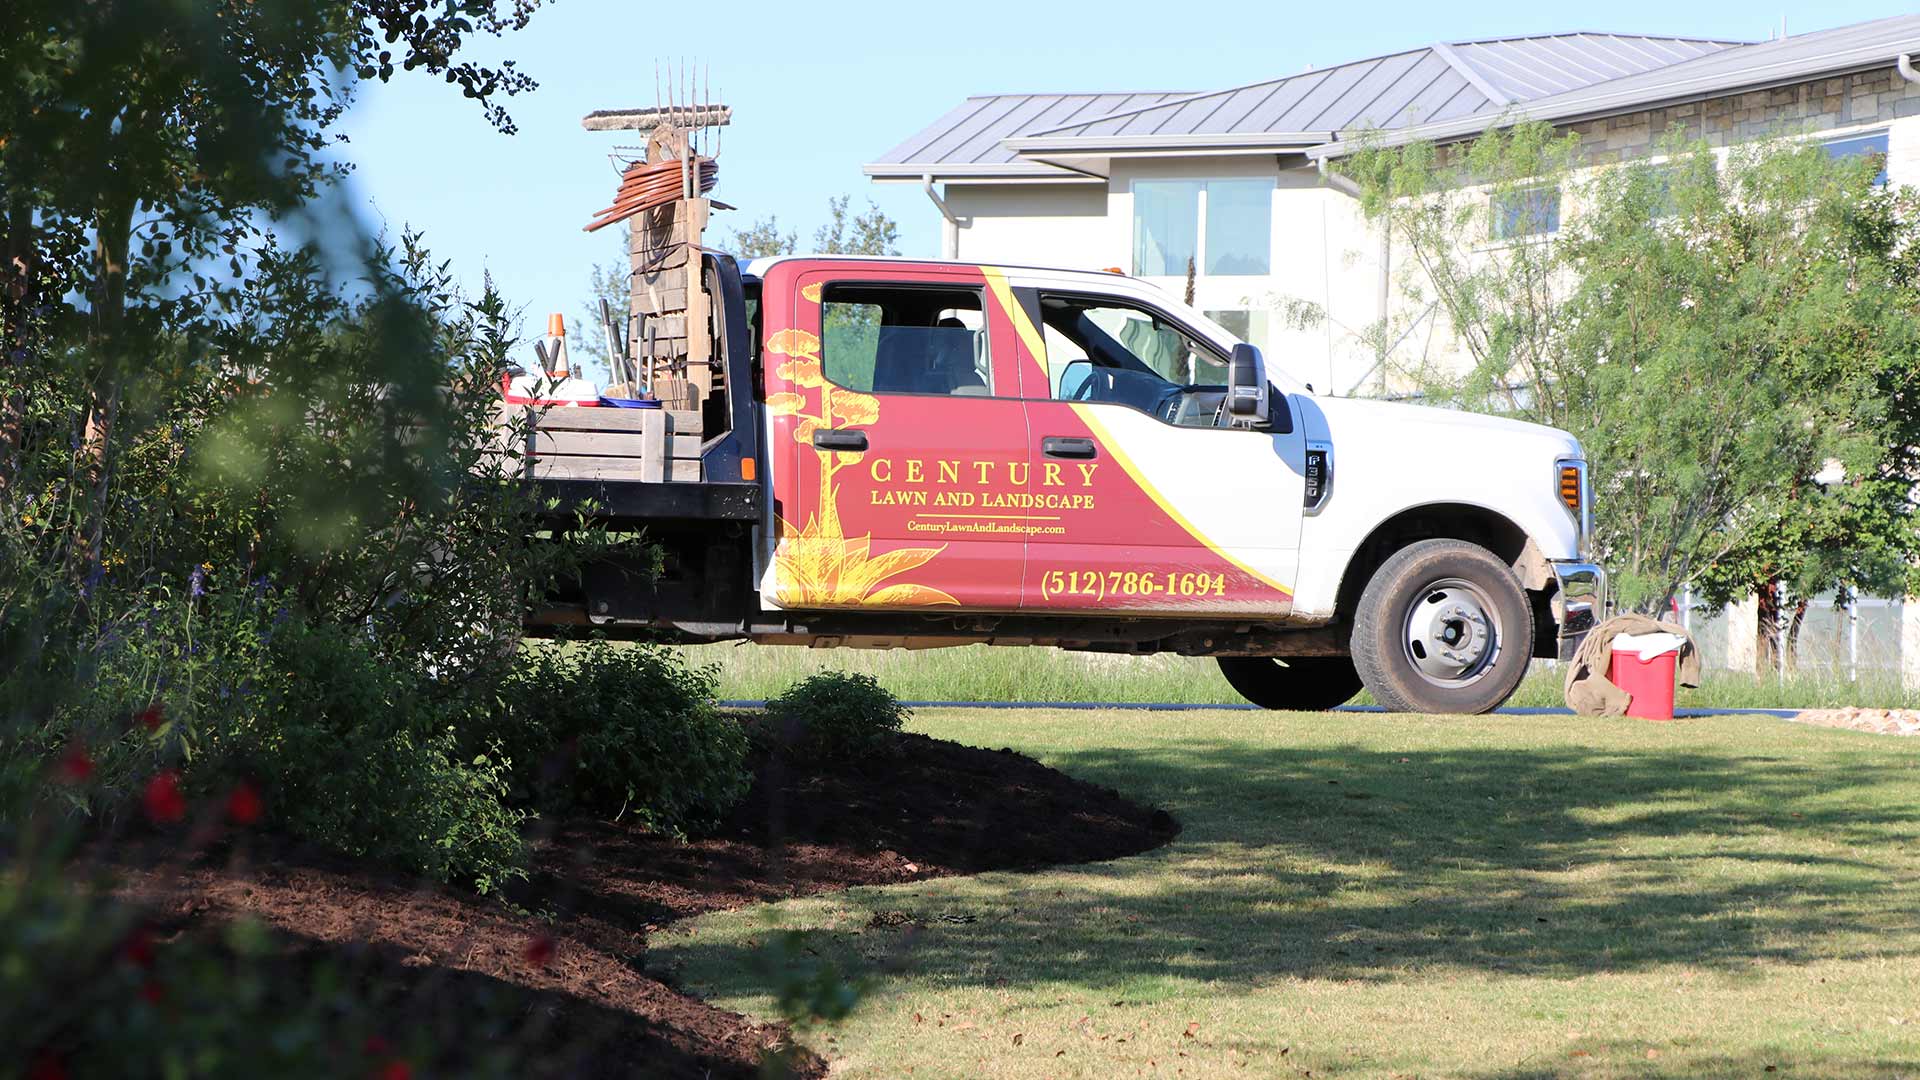 Century Lawn and Landscape work truck at a home in Austin, TX.